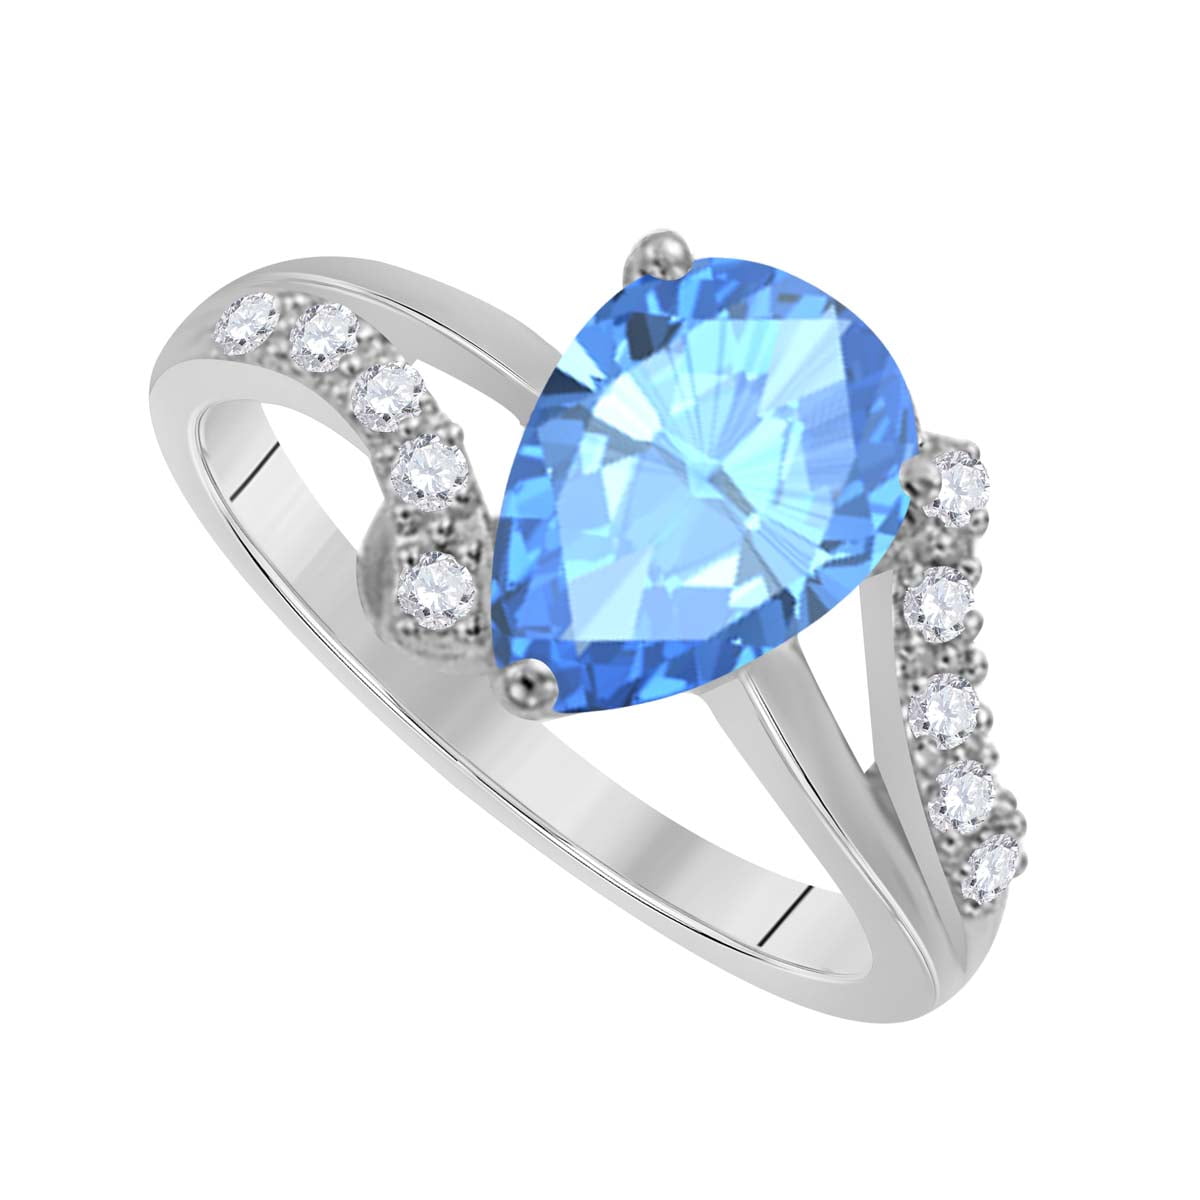 Authentic London Blue Topaz Ring | Frozen Ring | TheSoftCheek Jewelry